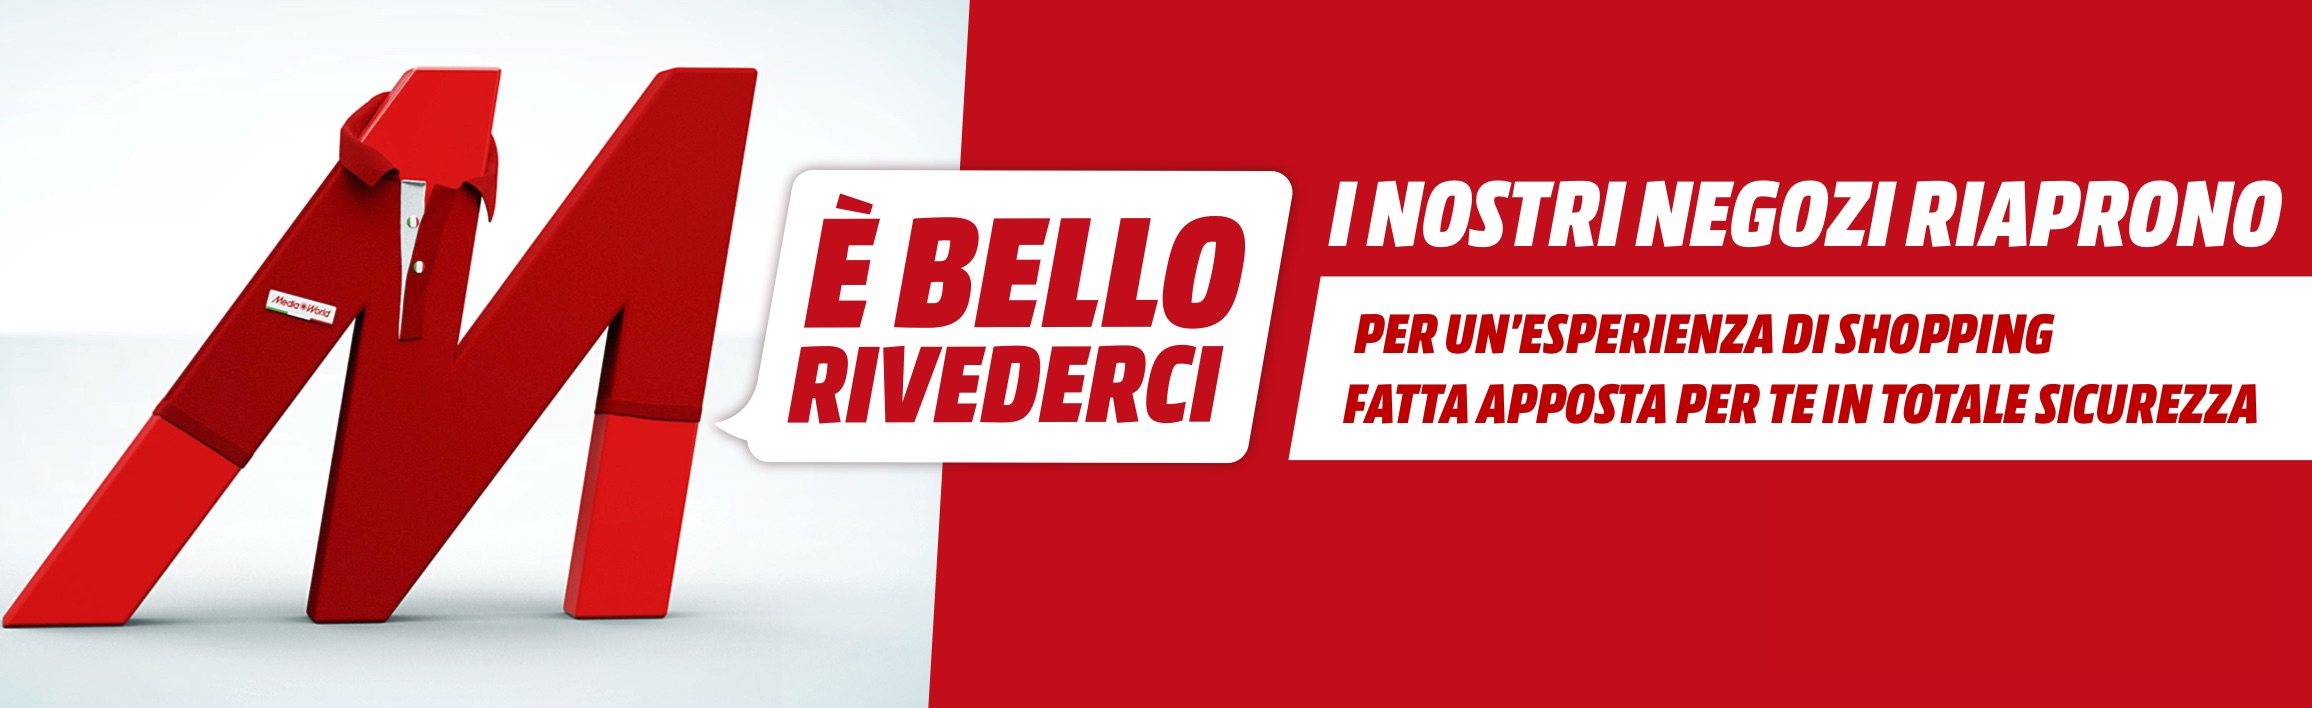 MEDIAWORLD REOPENS ITS STORES THROUGHOUT ITALY. THE TV AD DEDICATED TO GETTING BACK TO WORK “È BELLO RIVEDERCI” (“NICE TO SEE YOU AGAIN”) CREATED BY ARMANDO TESTA